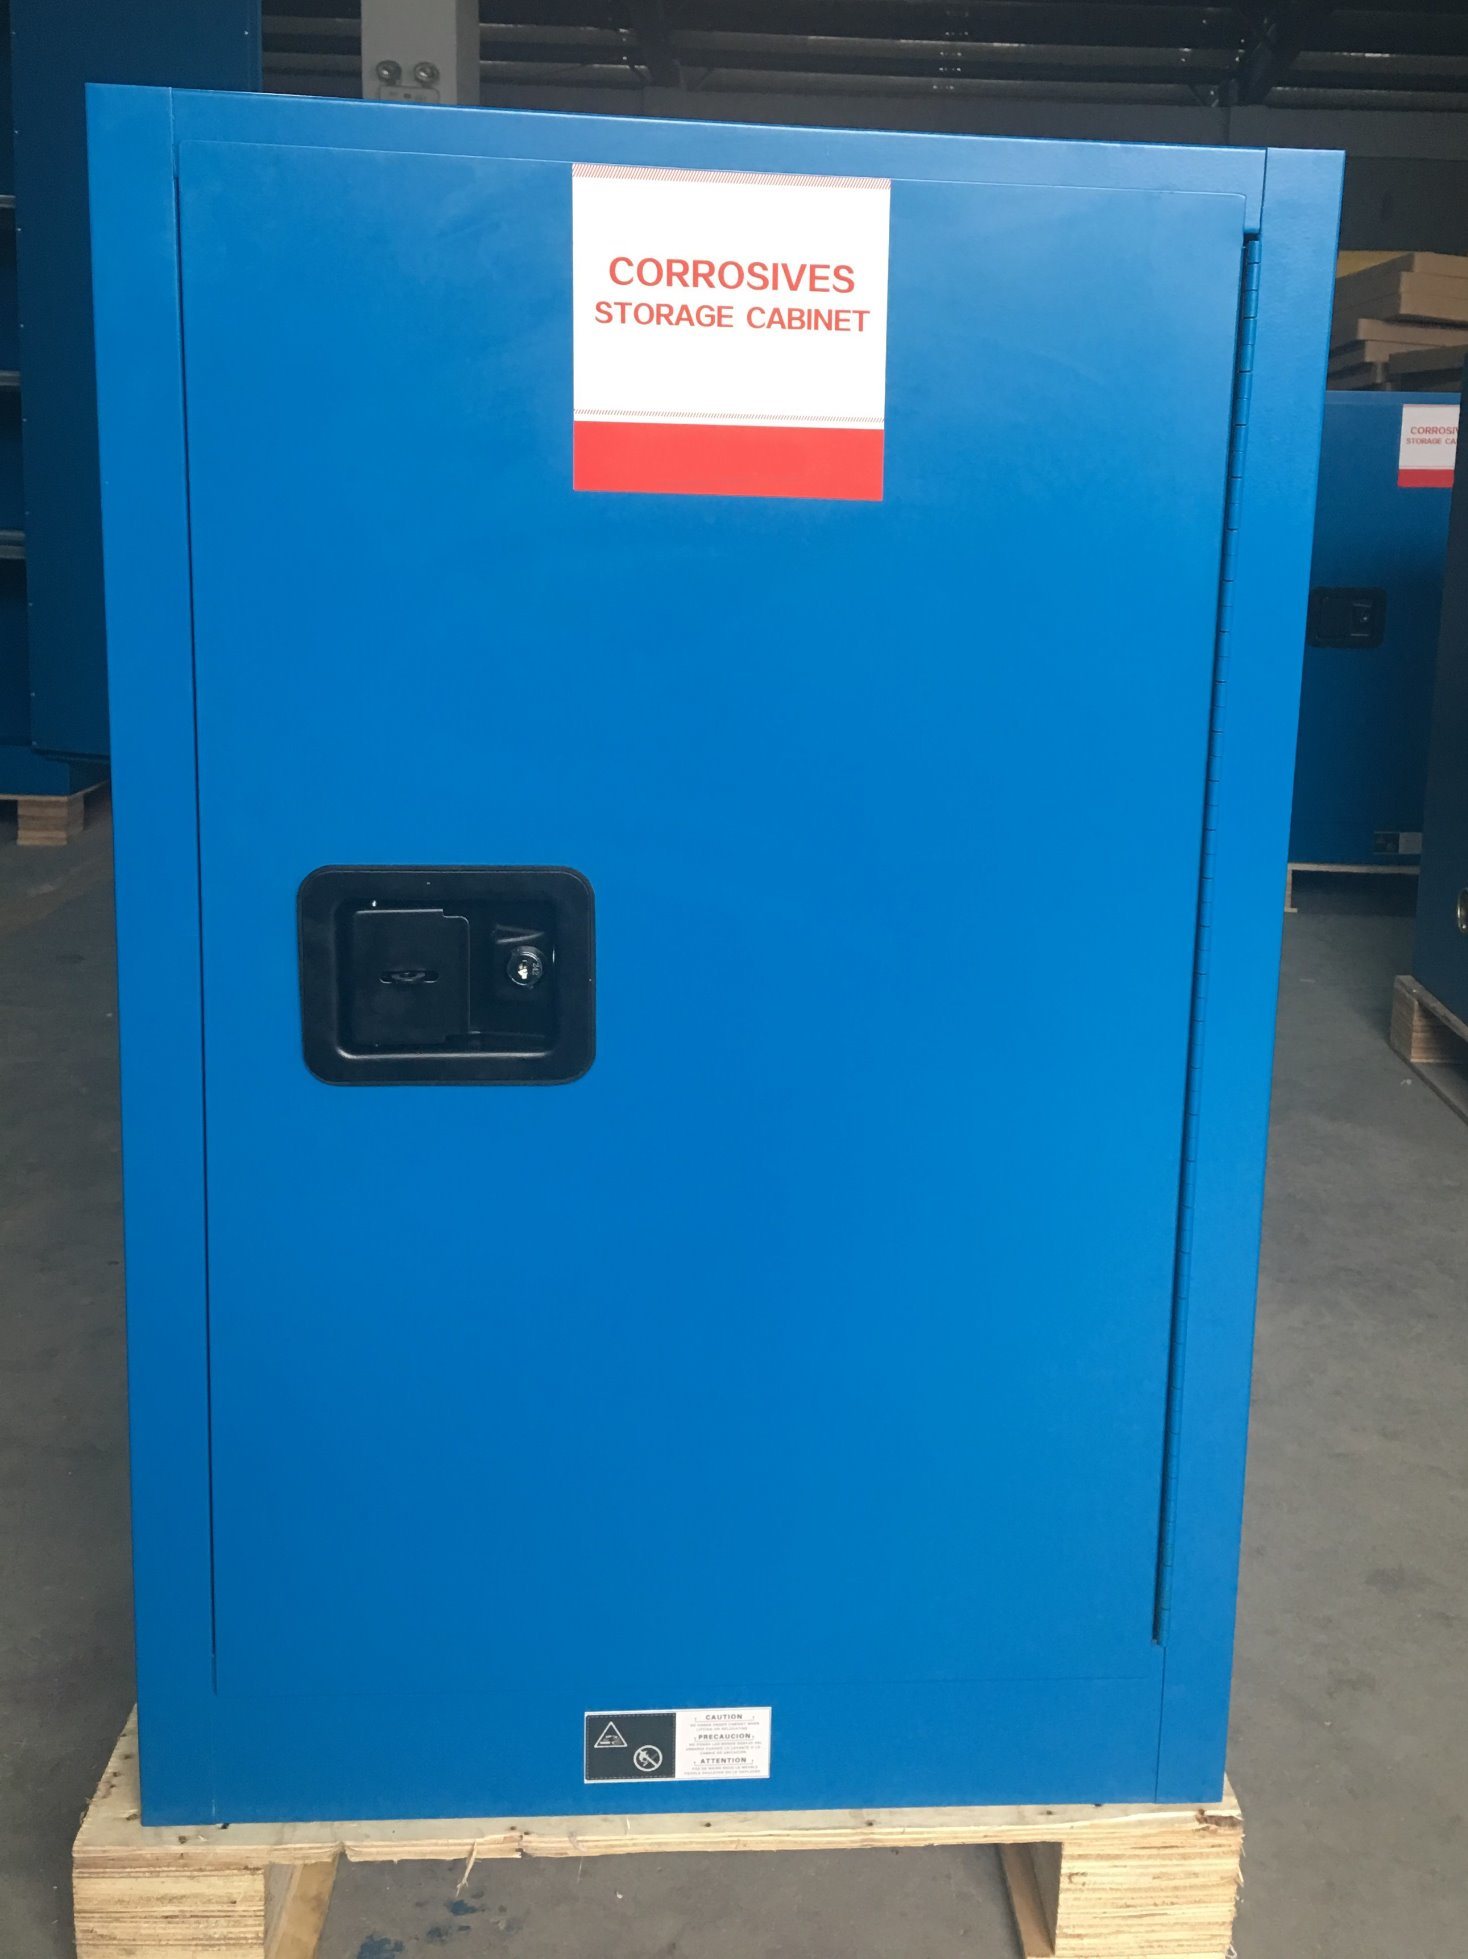 Industry Use 16 Gallon or 60lacid and Corrosive Storage Cabinet-Psen-R16